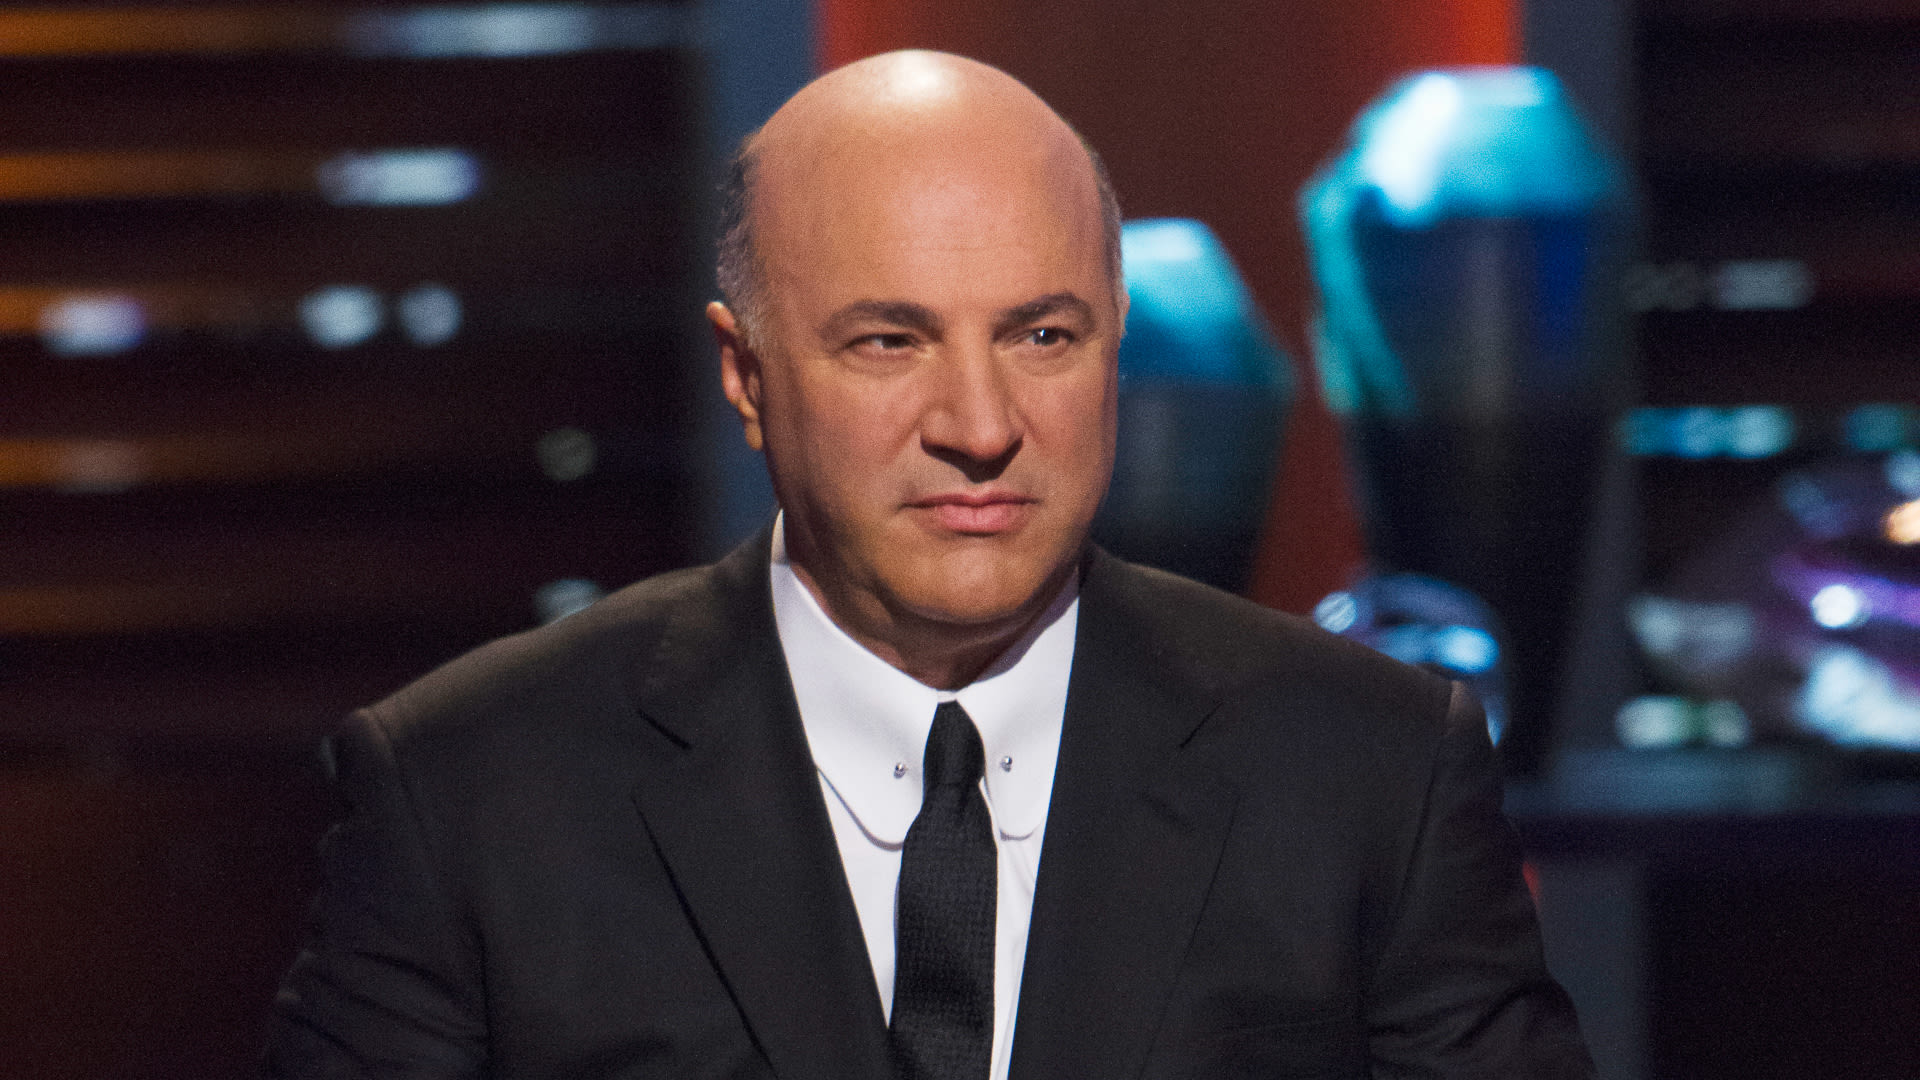 ‘It’s Just a Bad Idea’: Kevin O’Leary Explains Why Biden Should Not Raise Taxes